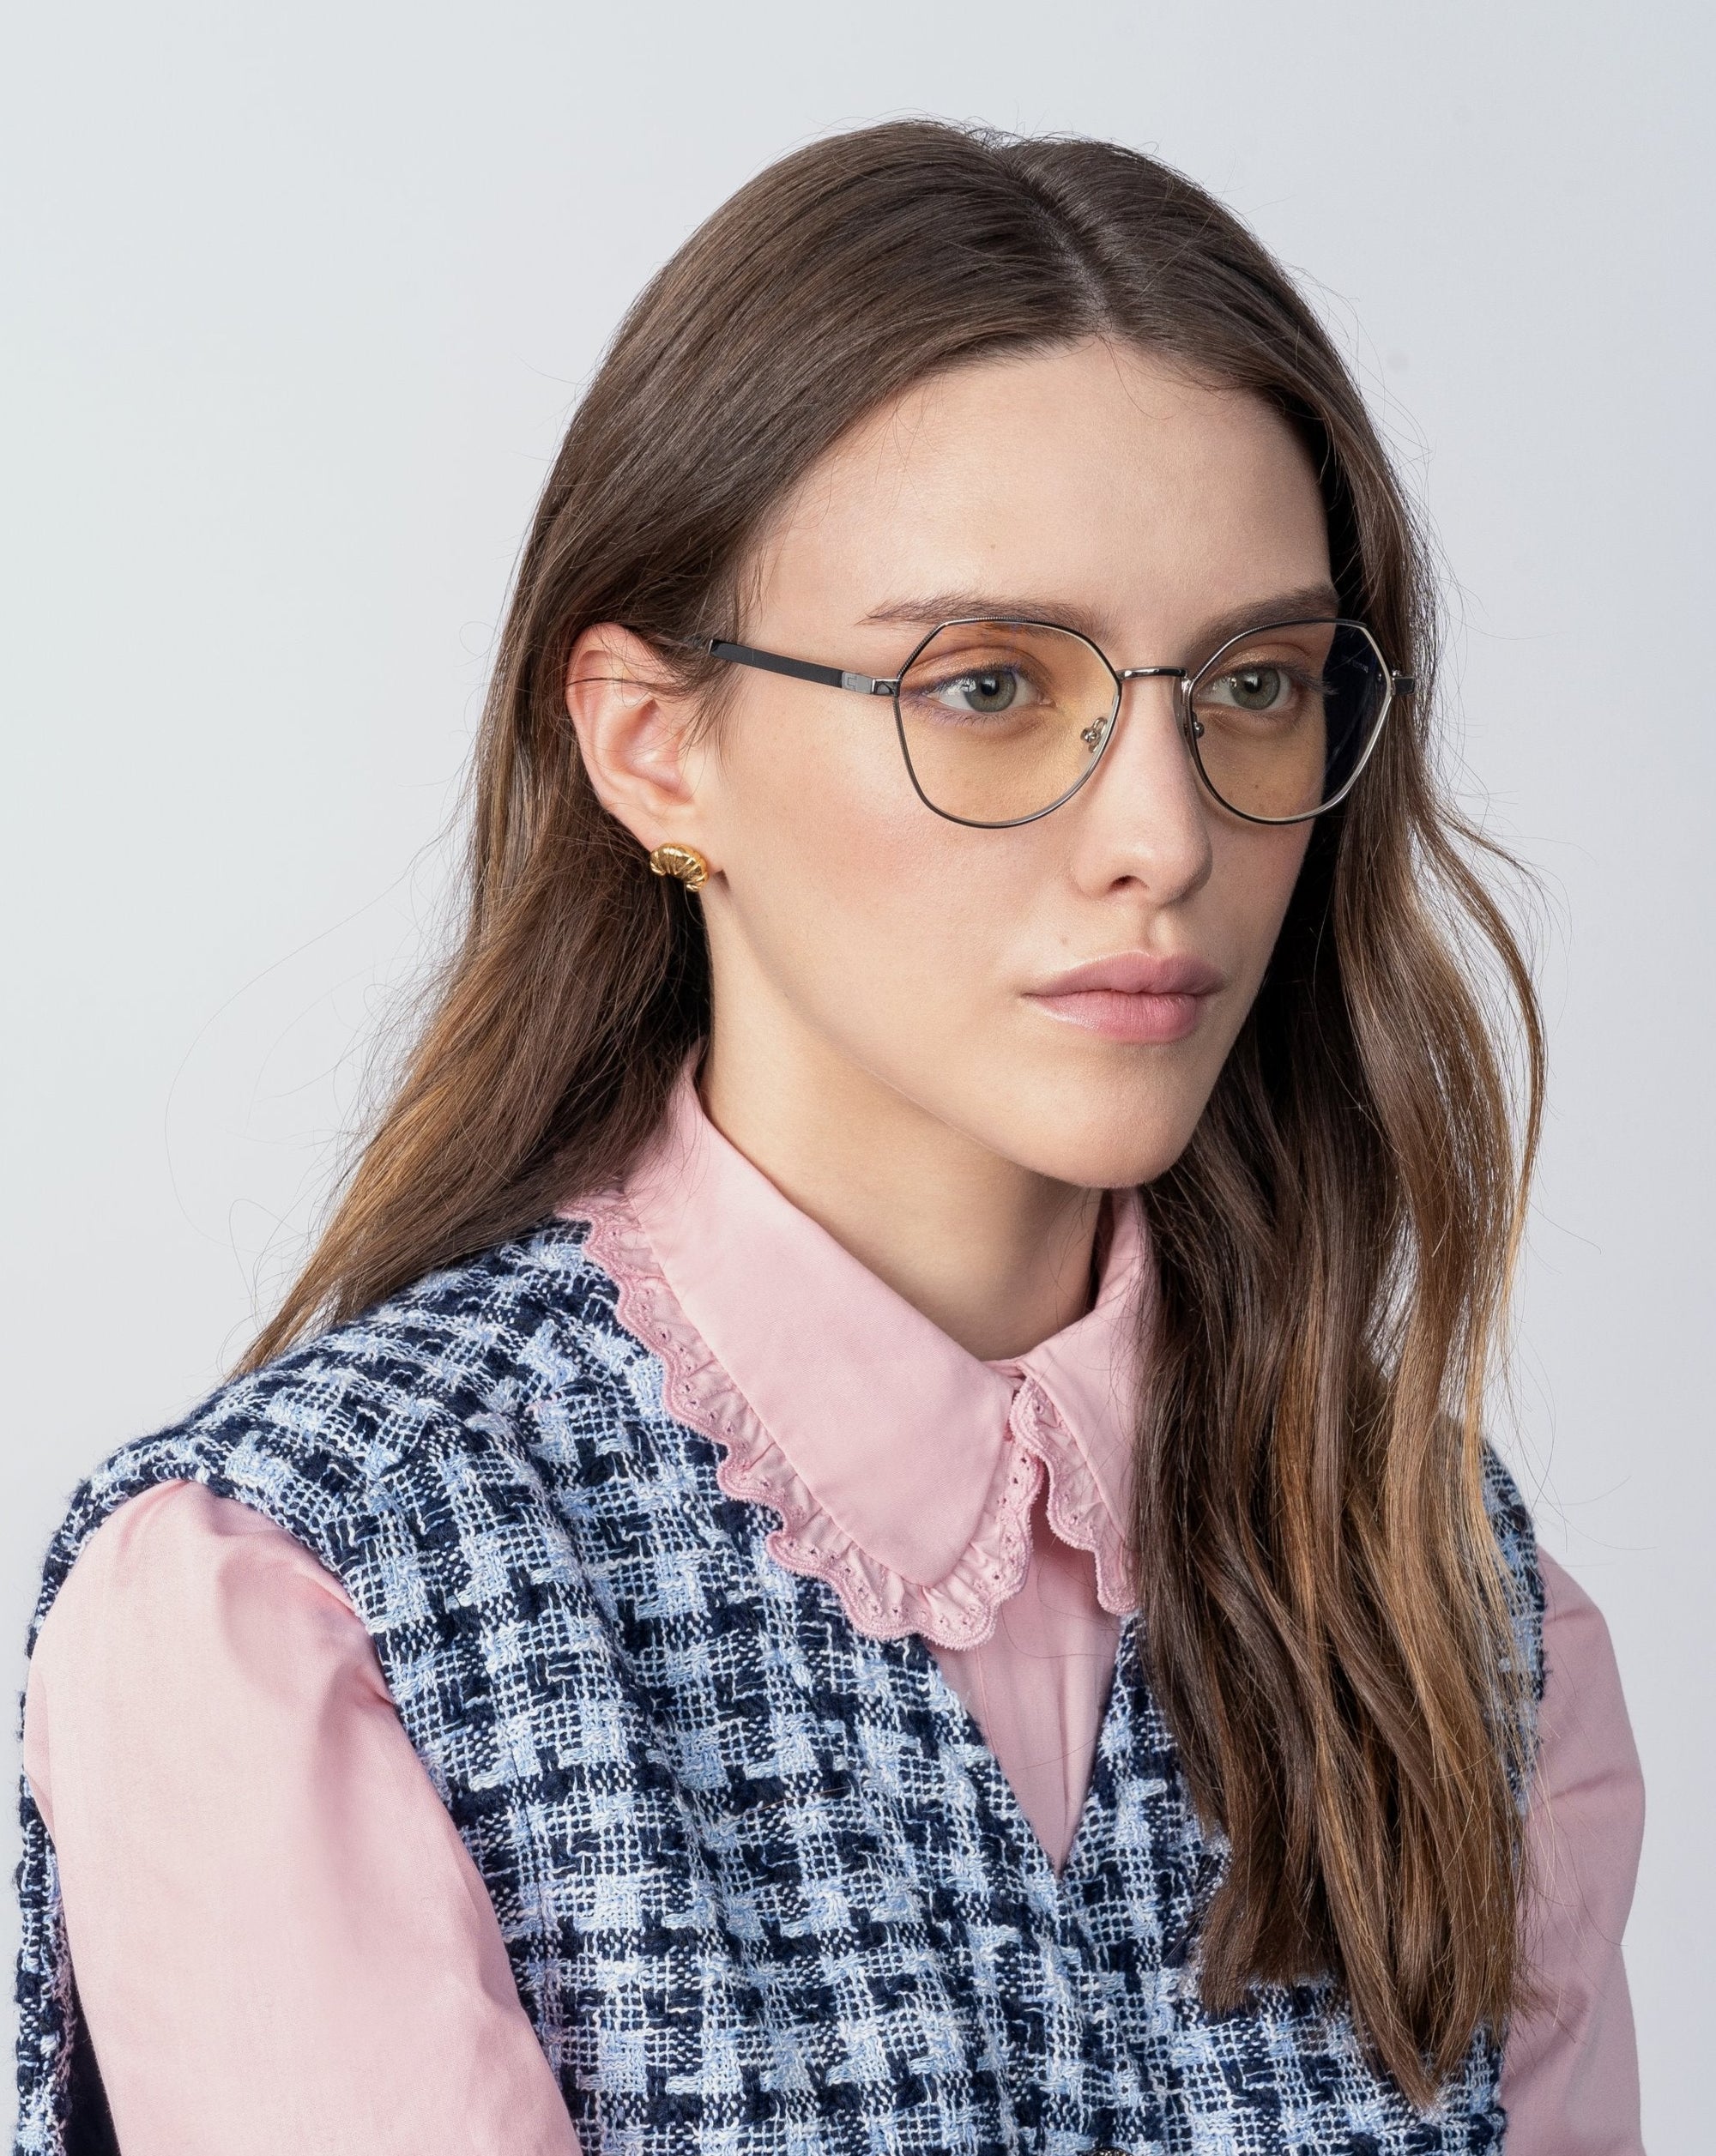 A woman with long brown hair wears Orchard round glasses with gold-plated frames by For Art&#39;s Sake®, a pink blouse with a lace collar, and a blue and white checkered vest. She has a neutral expression and is looking slightly to the side. The background is plain light gray.